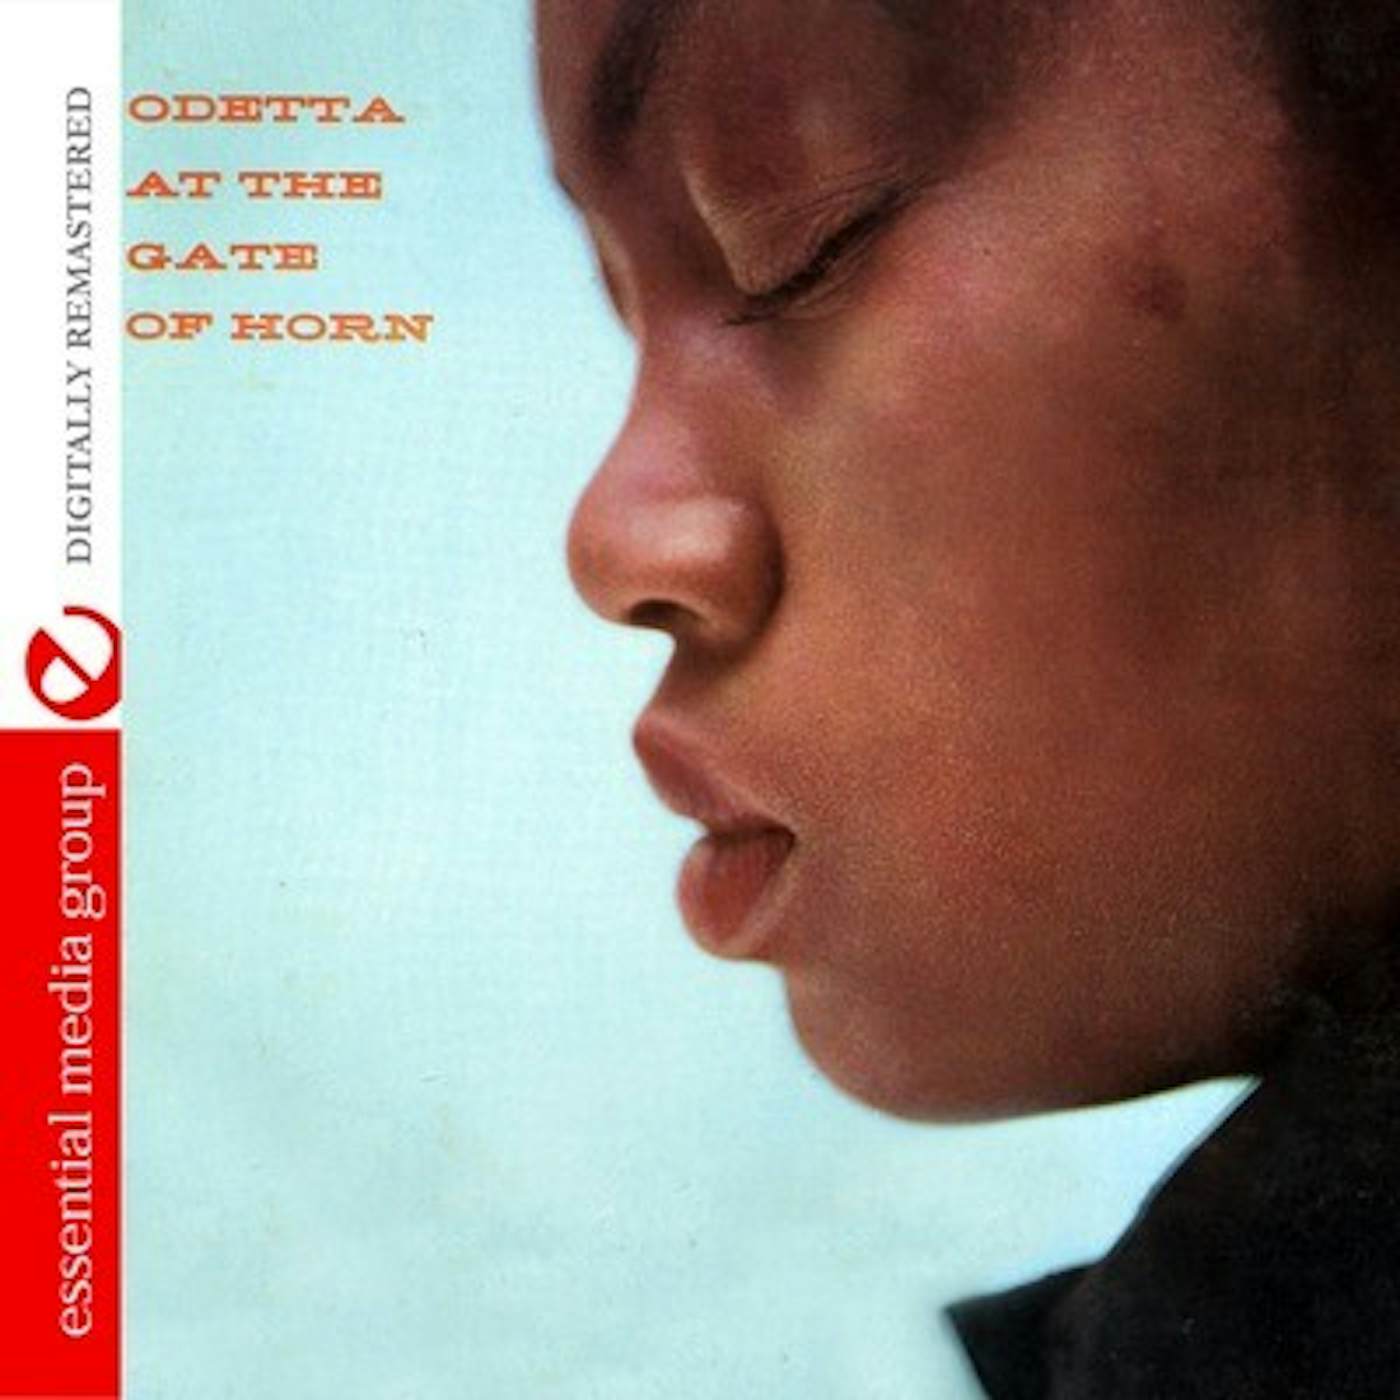 Odetta AT THE GATE OF HORN CD